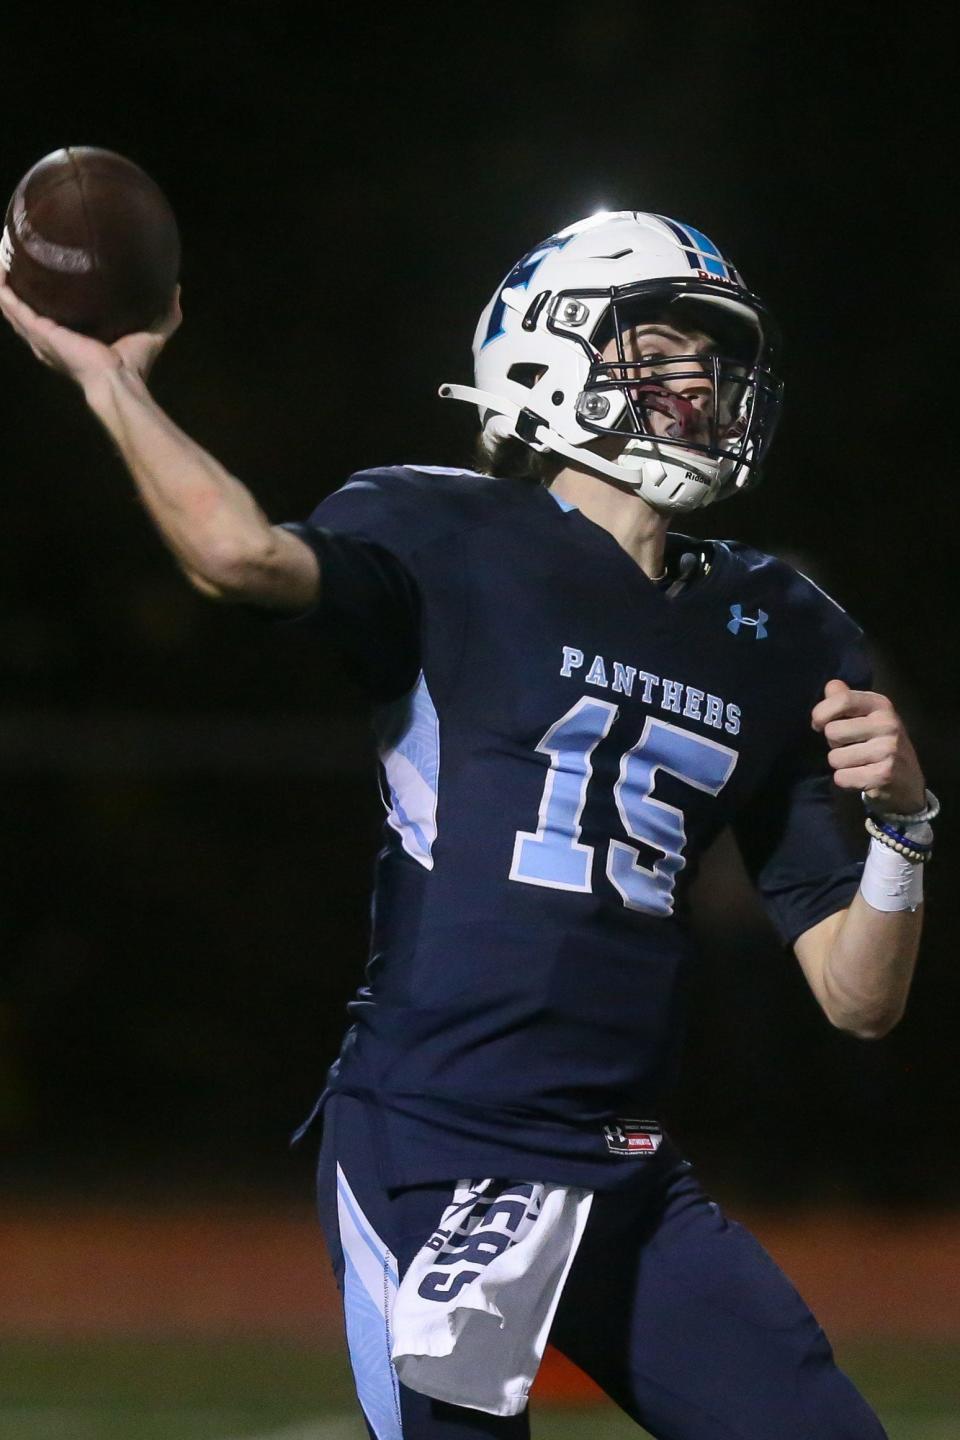 Franklin senior quarterback Jared Arone passes the ball during the Division 1 statewide quarterfinals against Methuen at Franklin High School on Nov. 12, 2021.